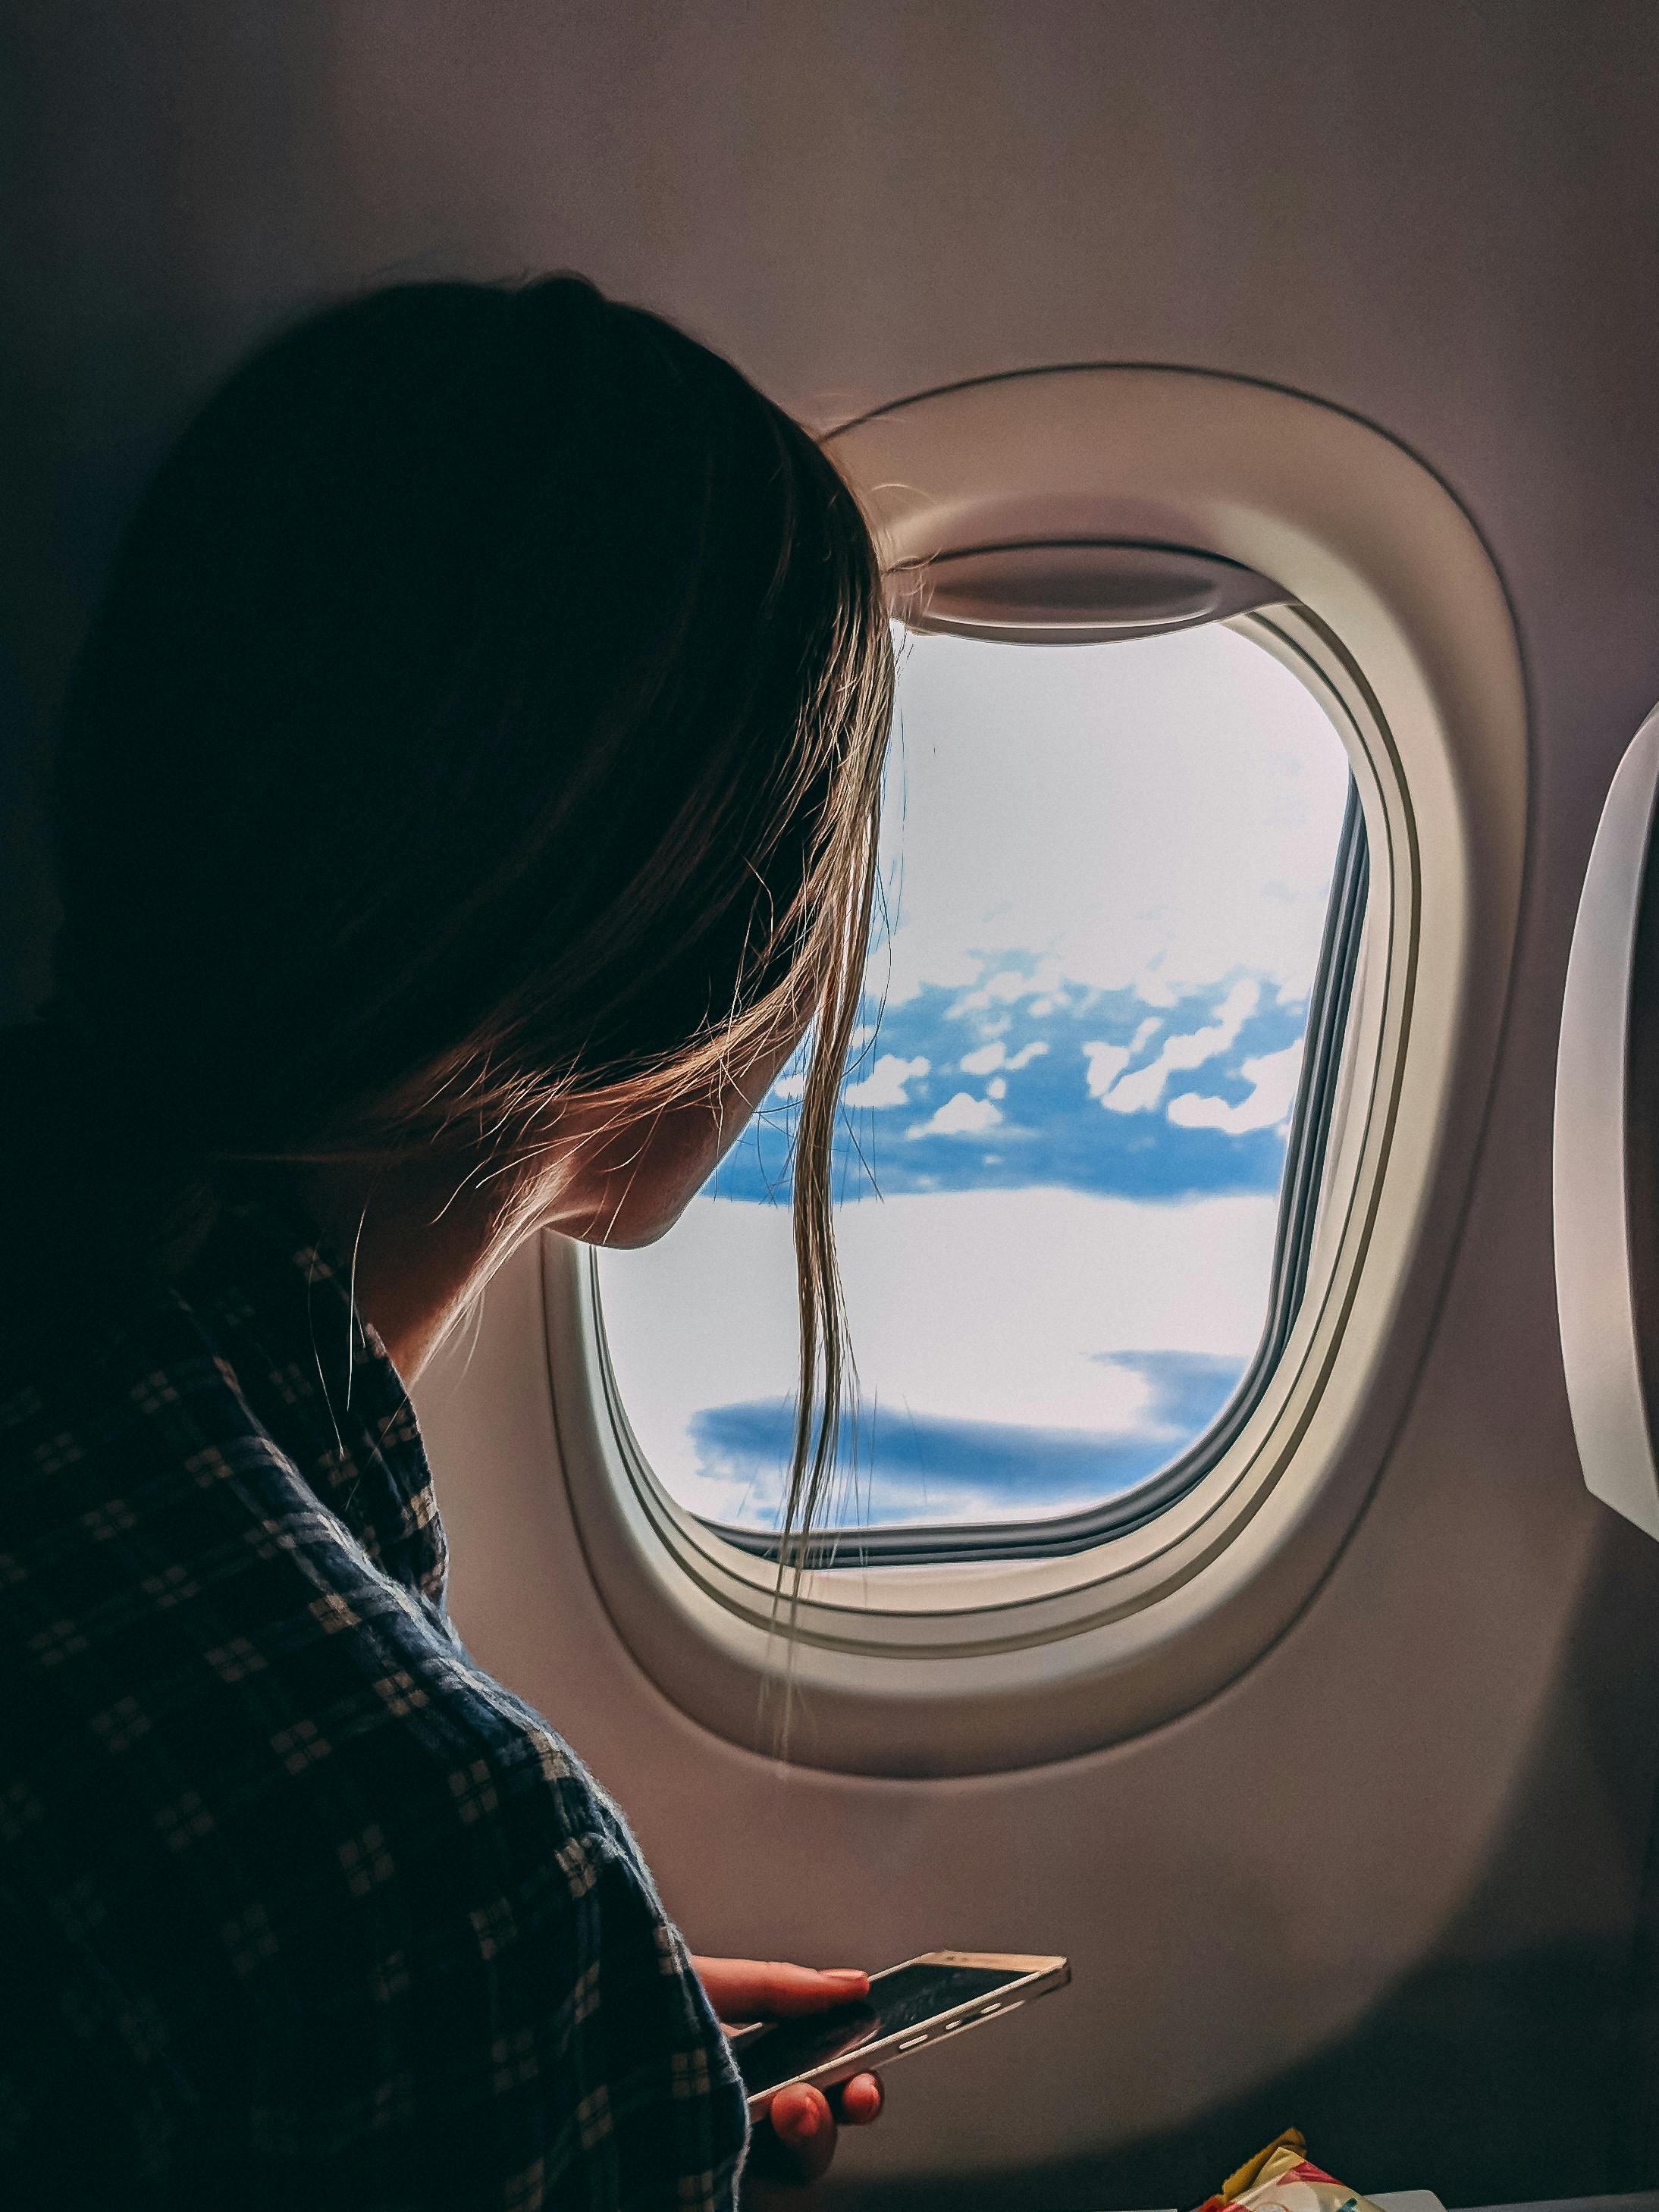 A woman holding a phone while sitting on an airplane | Source: Pexels